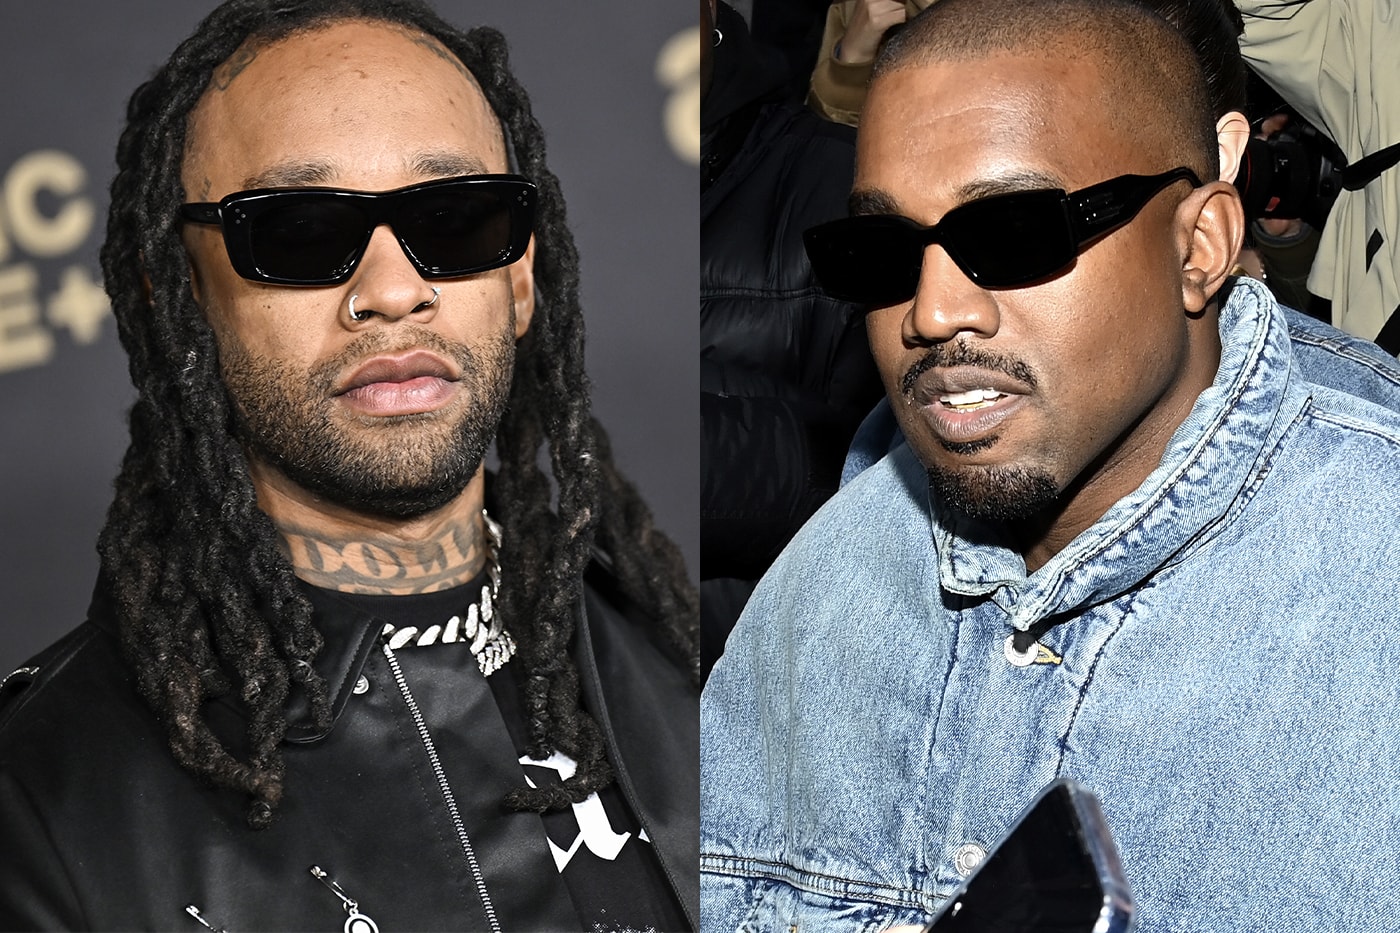 Ty Dolla sign Says kanye west ye Collaborative collab Album Coming Soon